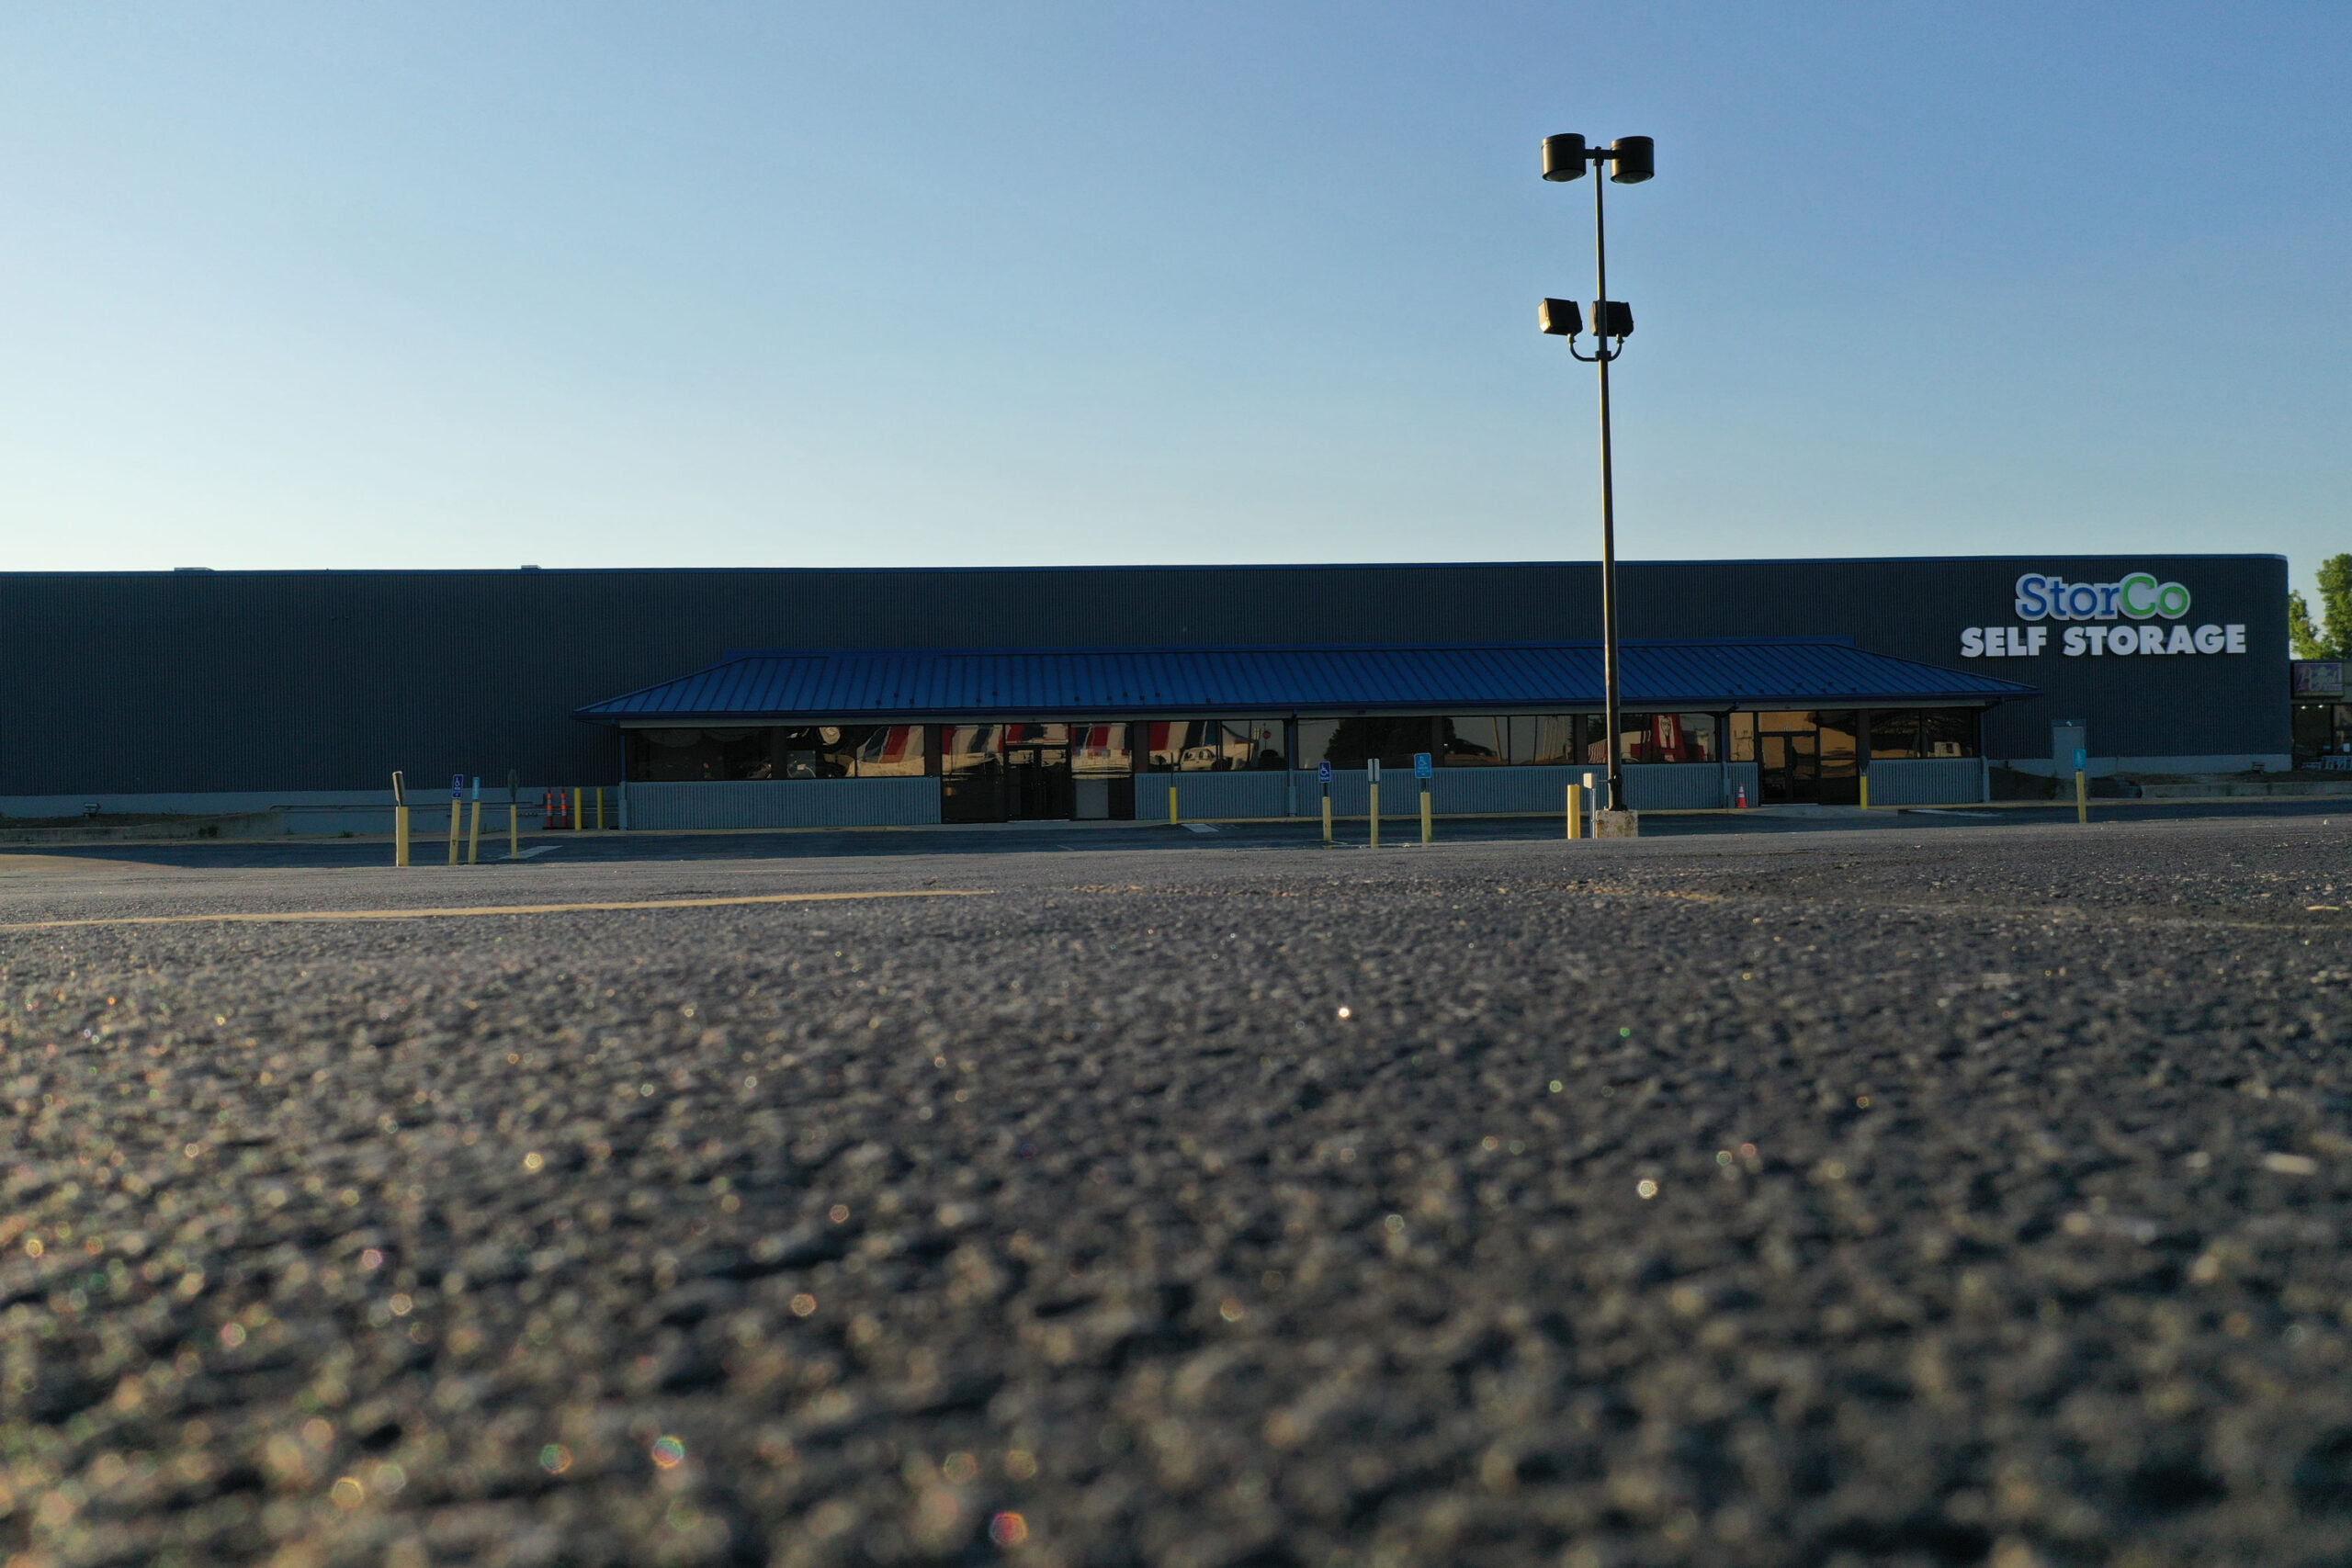 Parking lot with storage facility